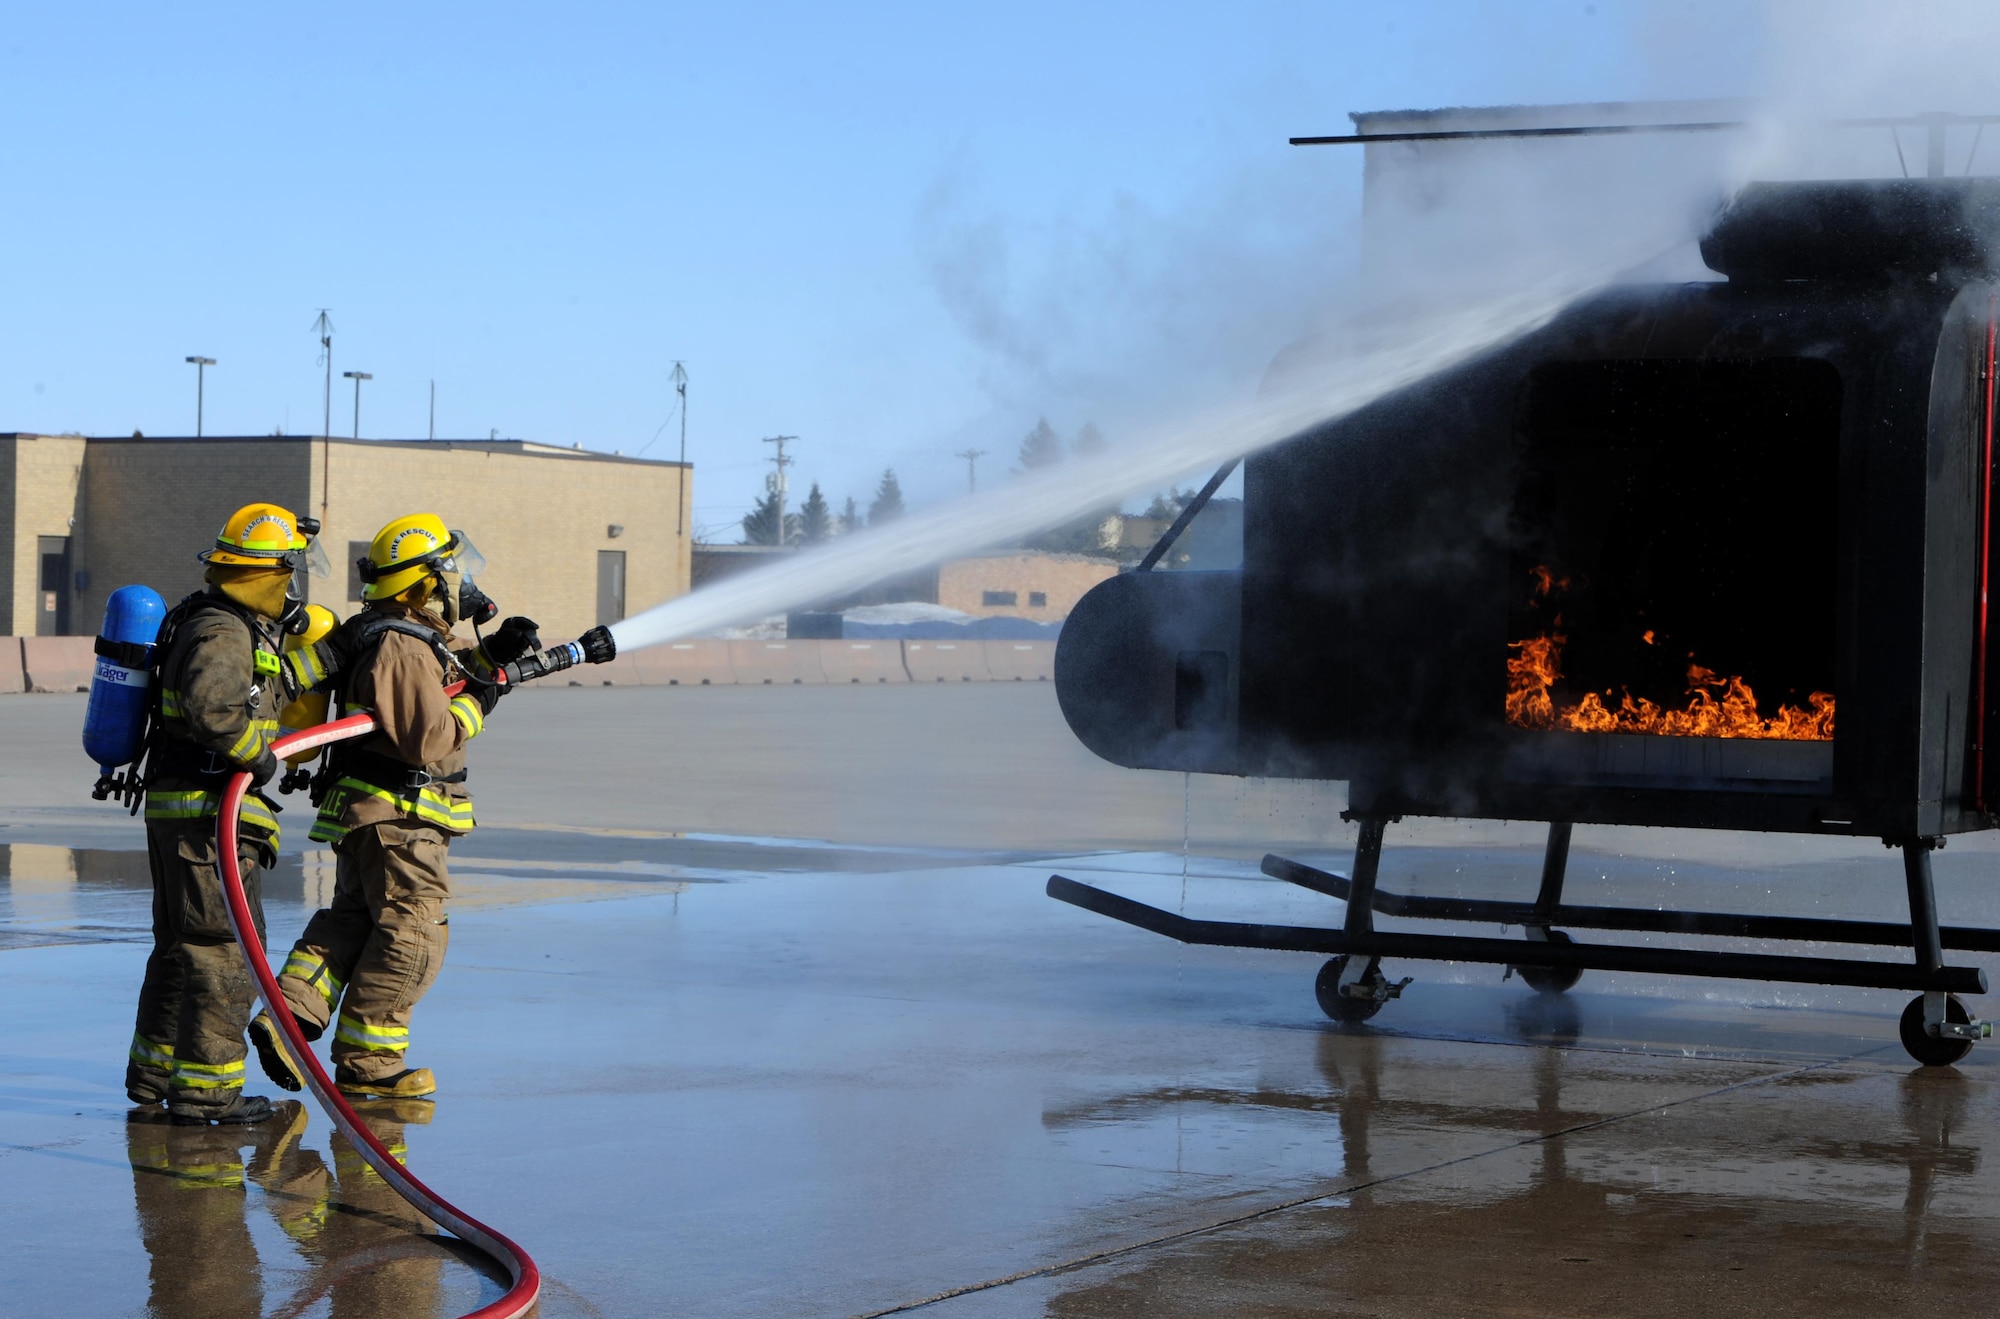 Dustin Bazille, Kenmore fire department firefighter, and Tim McCartney North Lemmon fire department firefighter, put out a simulated fire at Minot Air Force Base, N.D., Feb. 24, 2017. The Minot AFB fire department hosted training with local fire departments, scenarios included simulated helicopter fire and missile field response. (U.S. Air Force photo/Staff Sgt. Chad Trujillo)